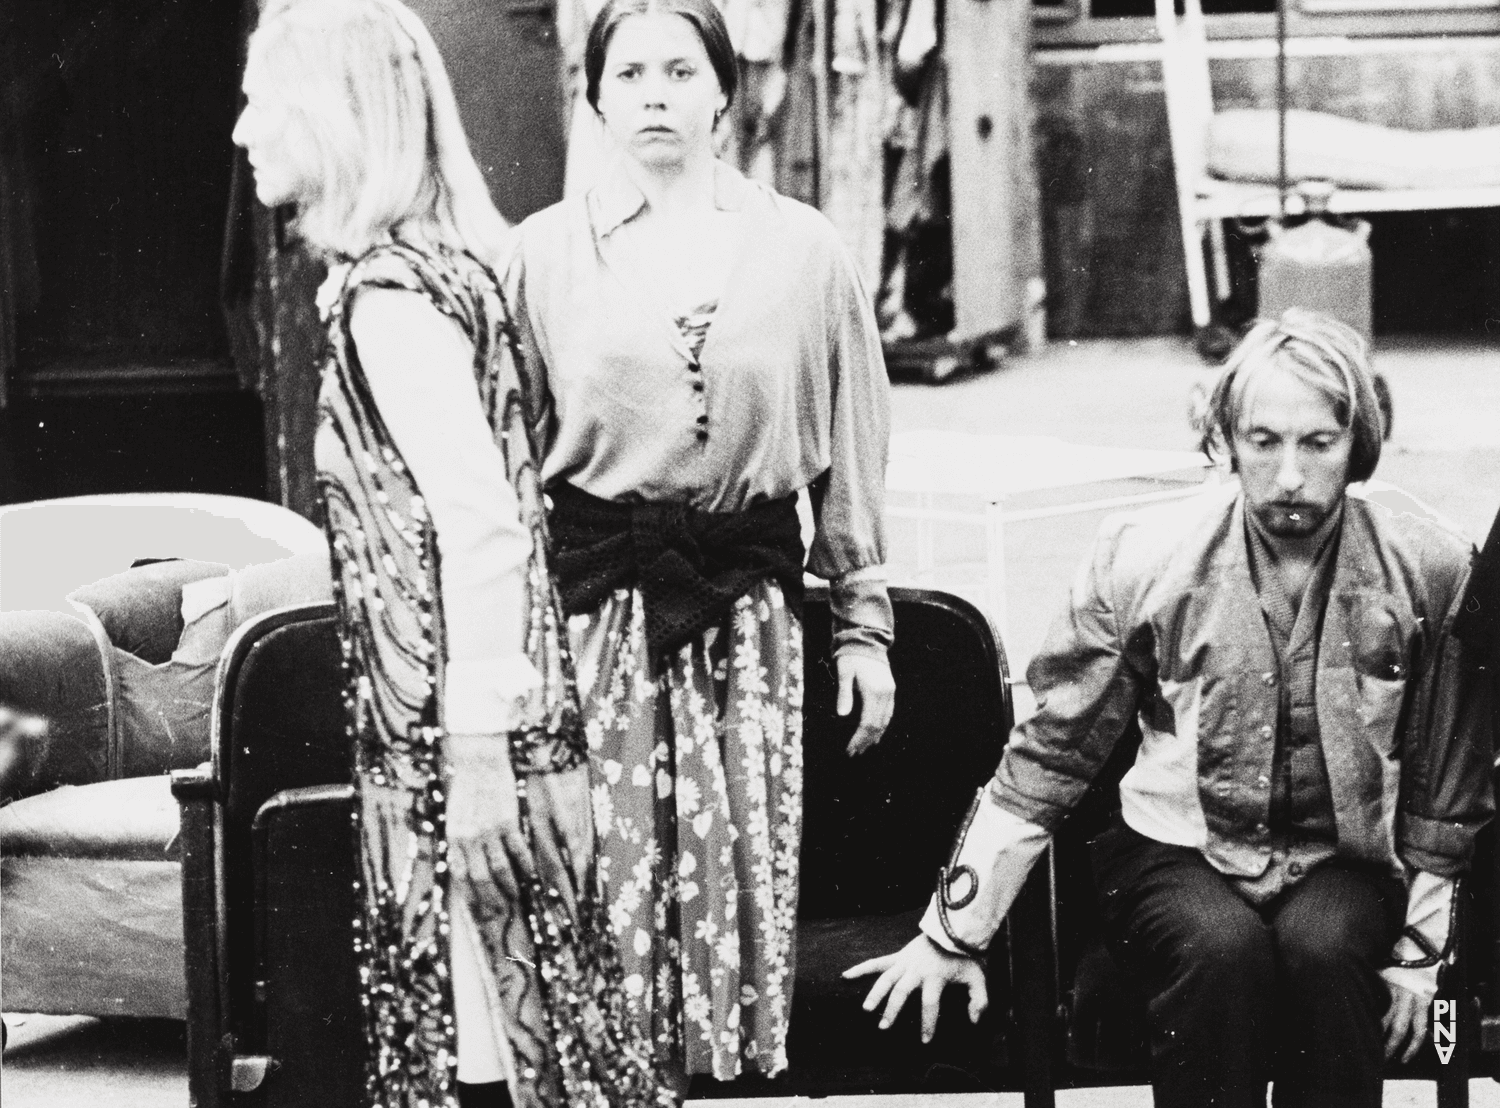 Soňa Červená, Dominique Mercy and Josephine Ann Endicott in “He Takes Her by The Hand and Leads Her Into the Castle, The Others Follow” by Pina Bausch